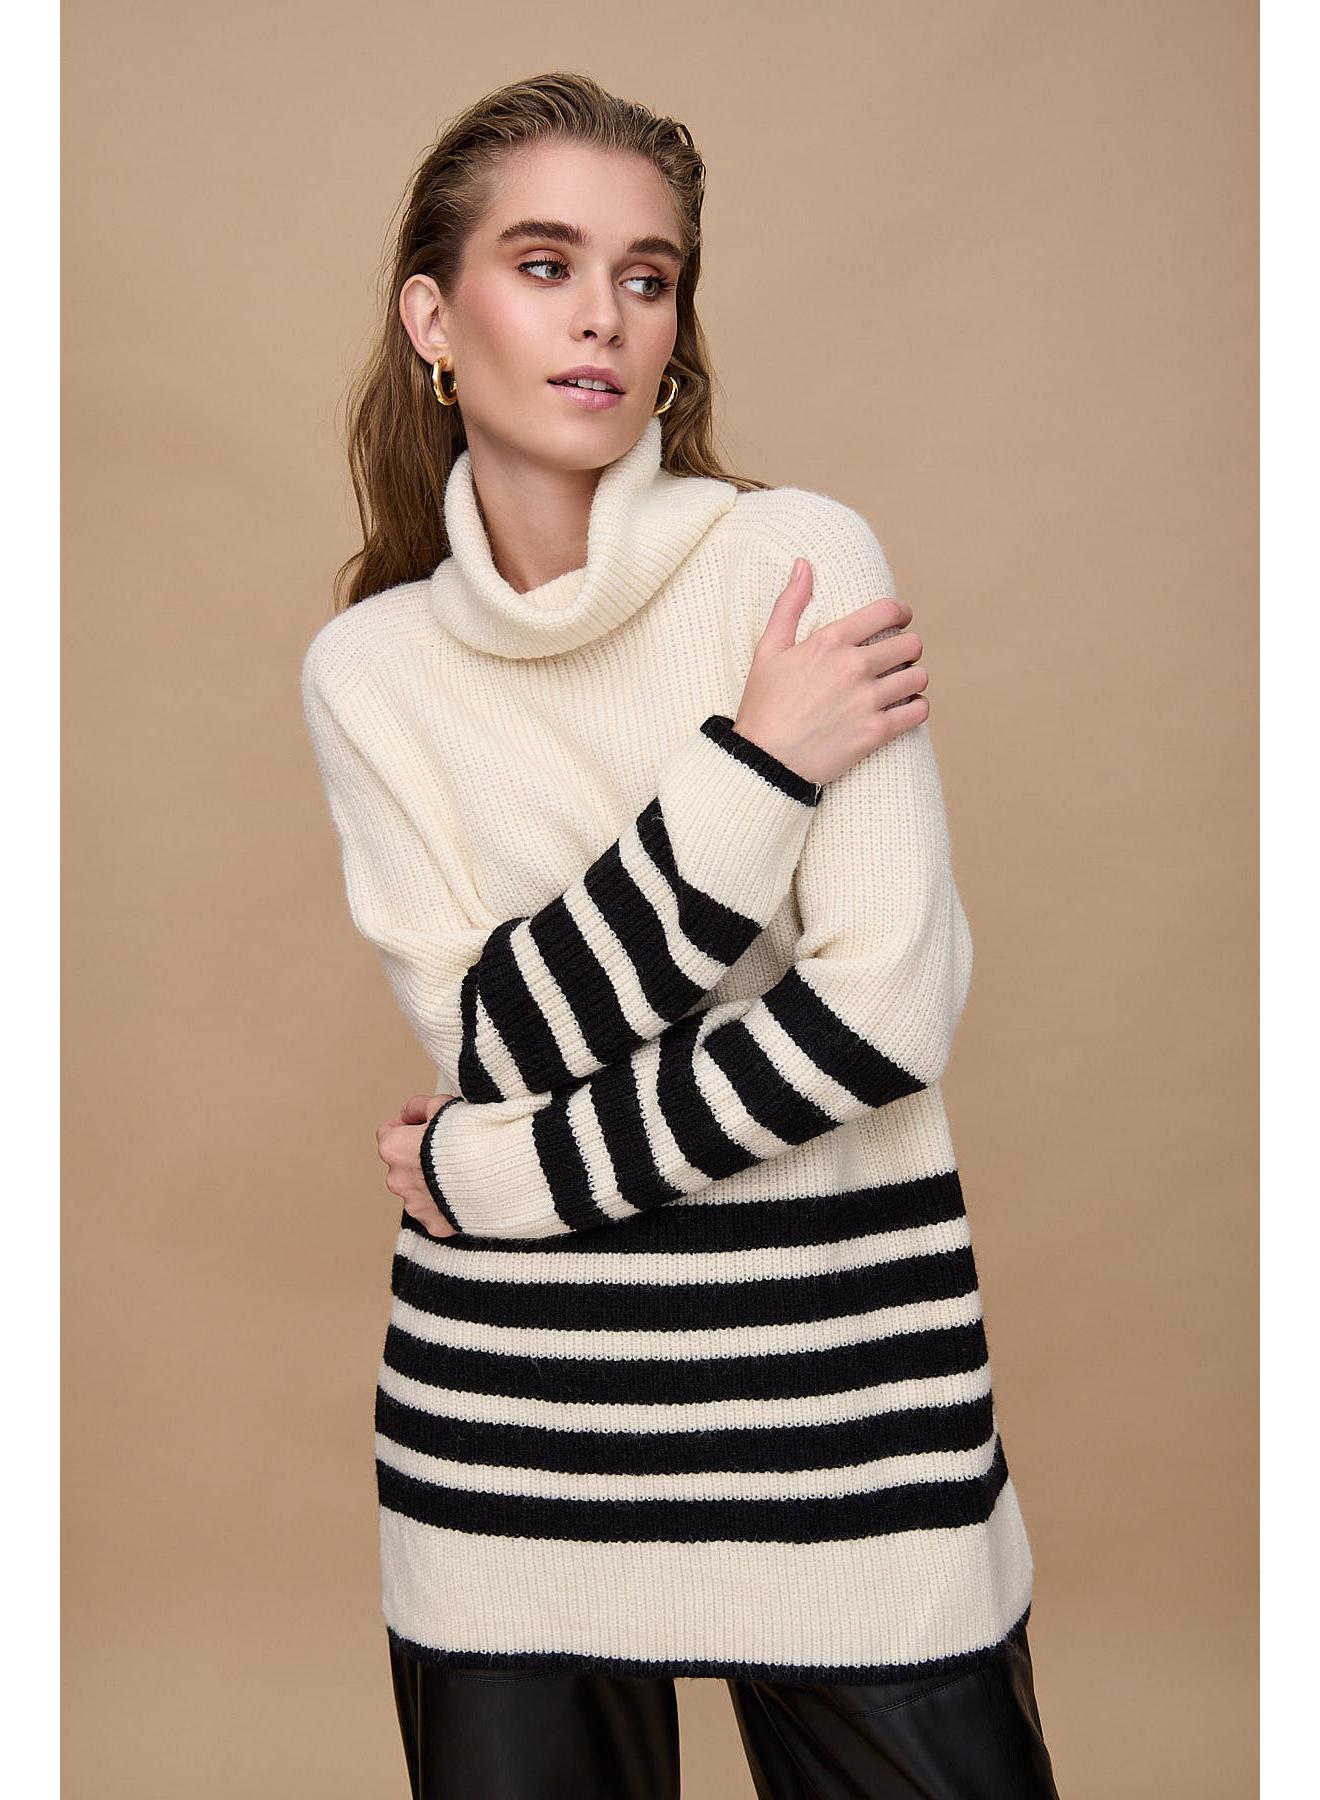 Turtlenet sweater with stripes - 4